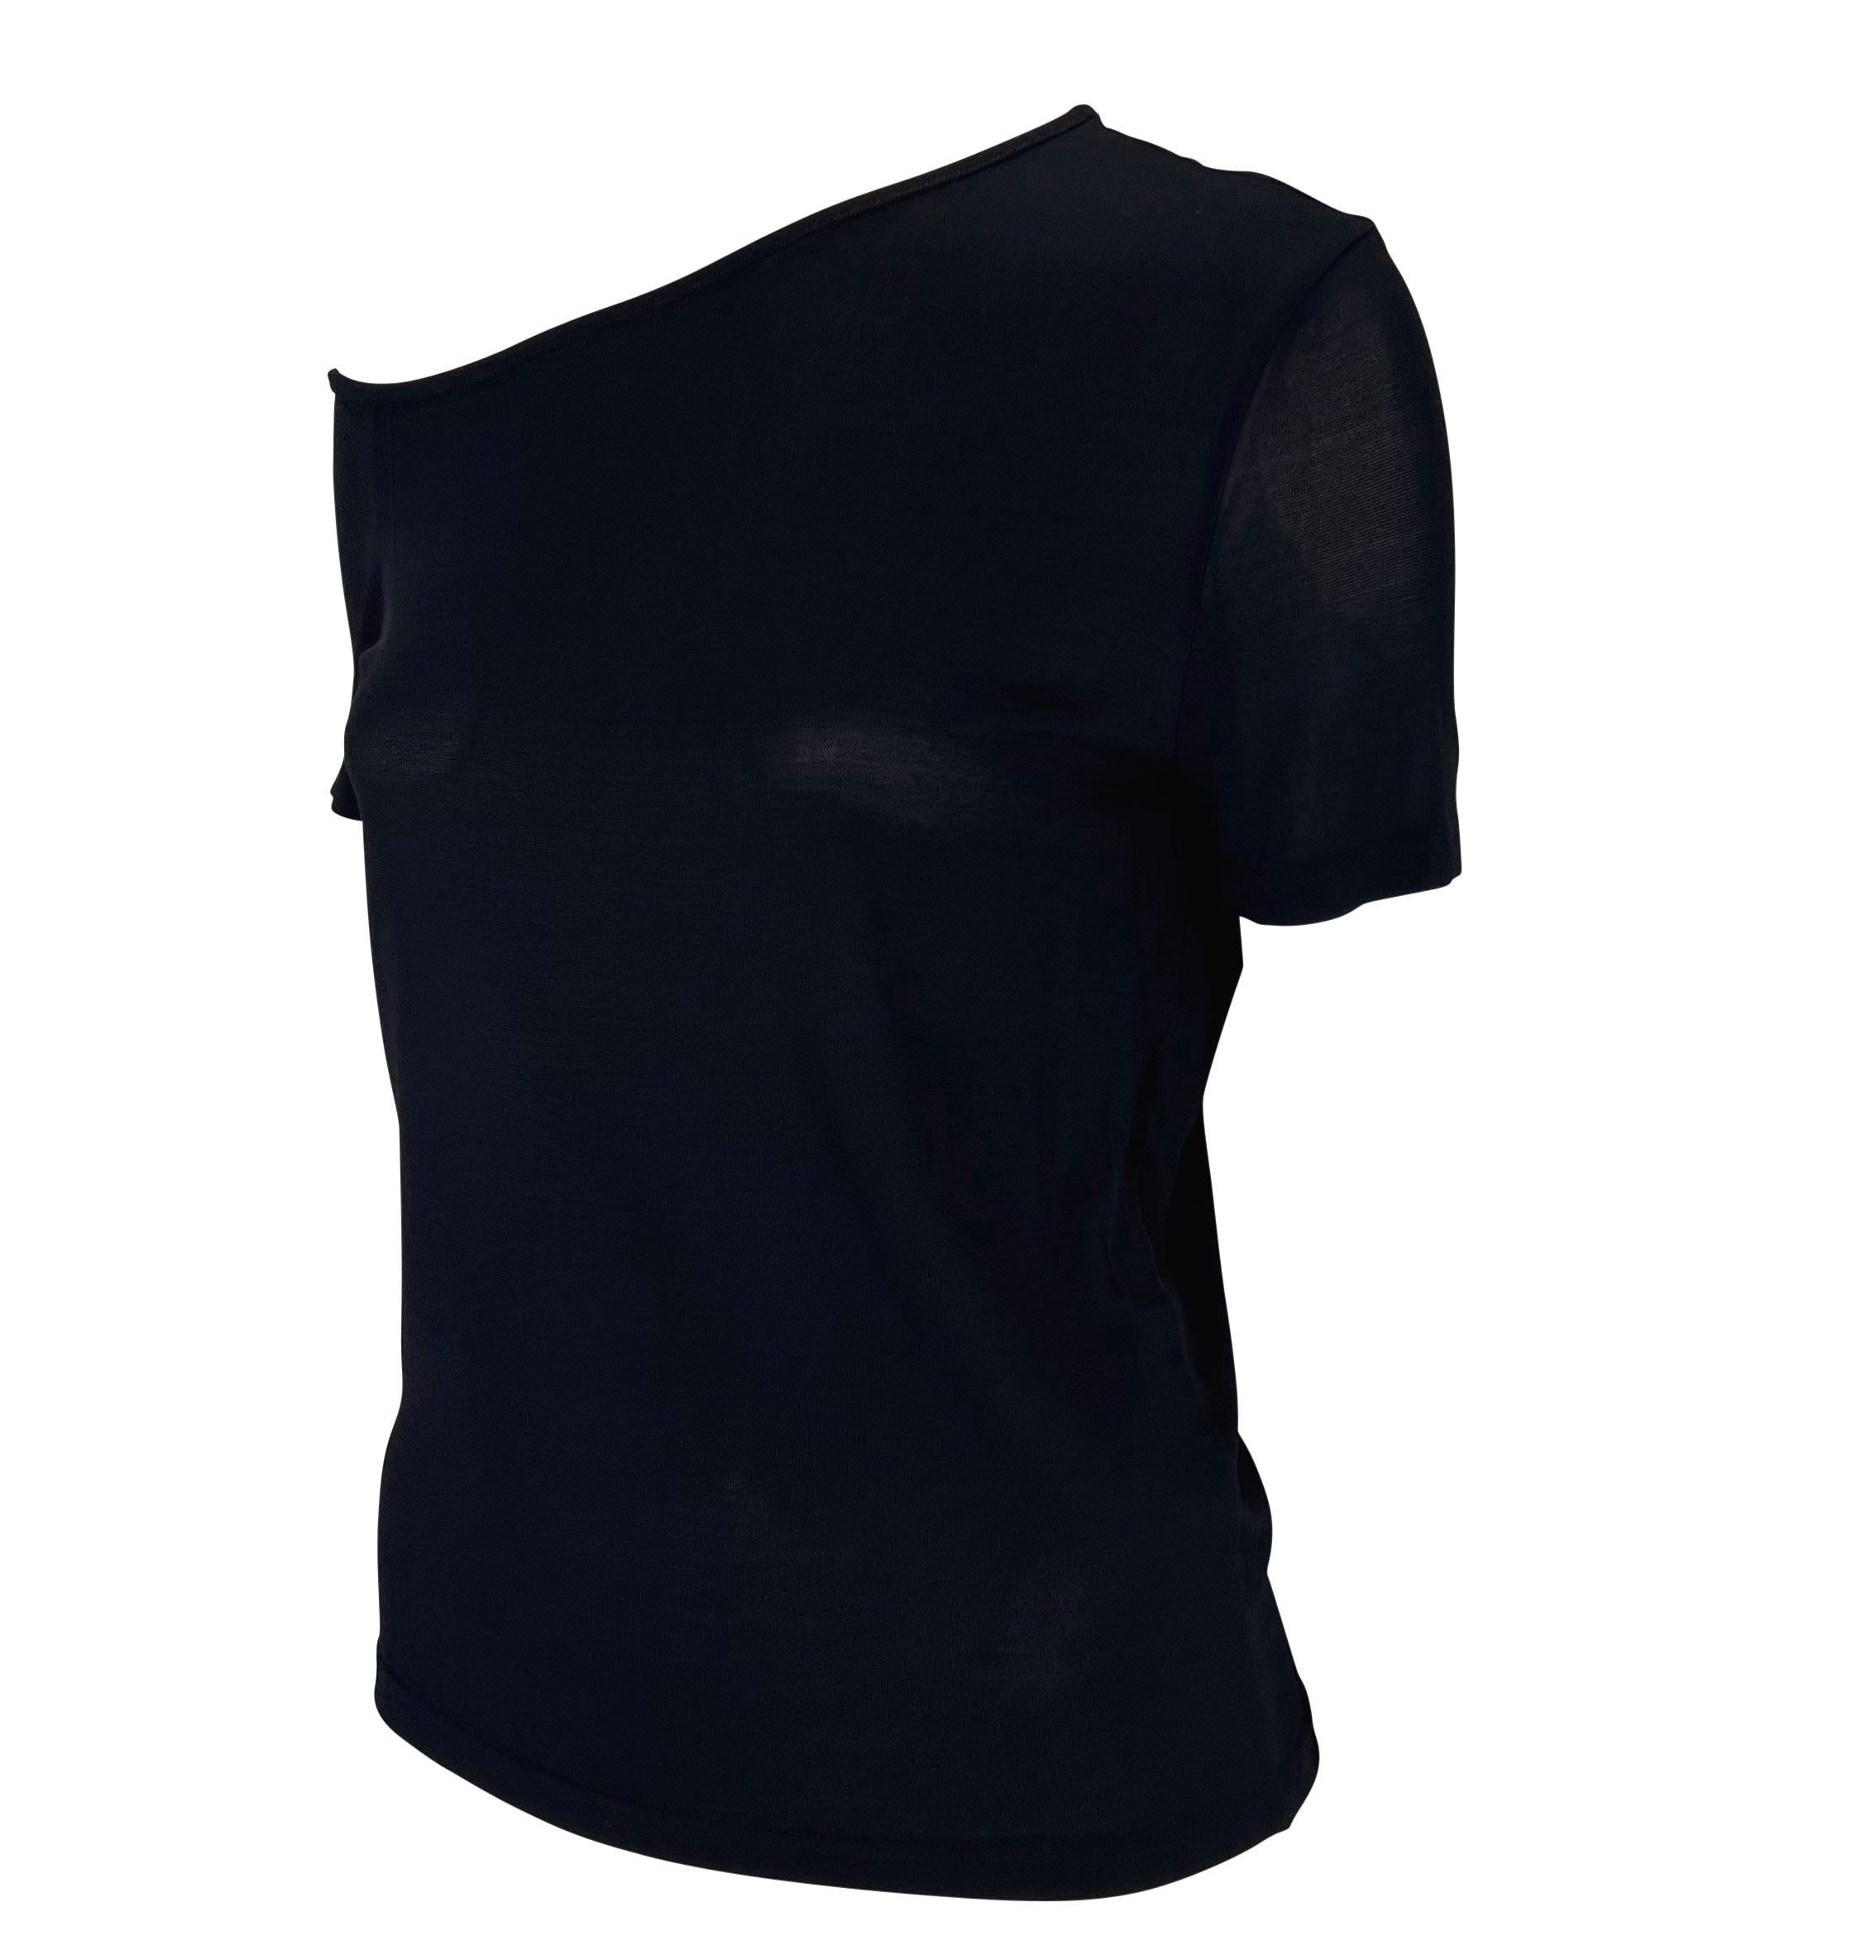 TheRealList presents: a fabulous knit navy asymmetric Gucci t-shirt, designed by Tom Ford. From the Spring/Summer 1998 collection, this elevated t-shirt is constructed of a semi-sheer navy top that is made complete with an asymmetric scoop neckline